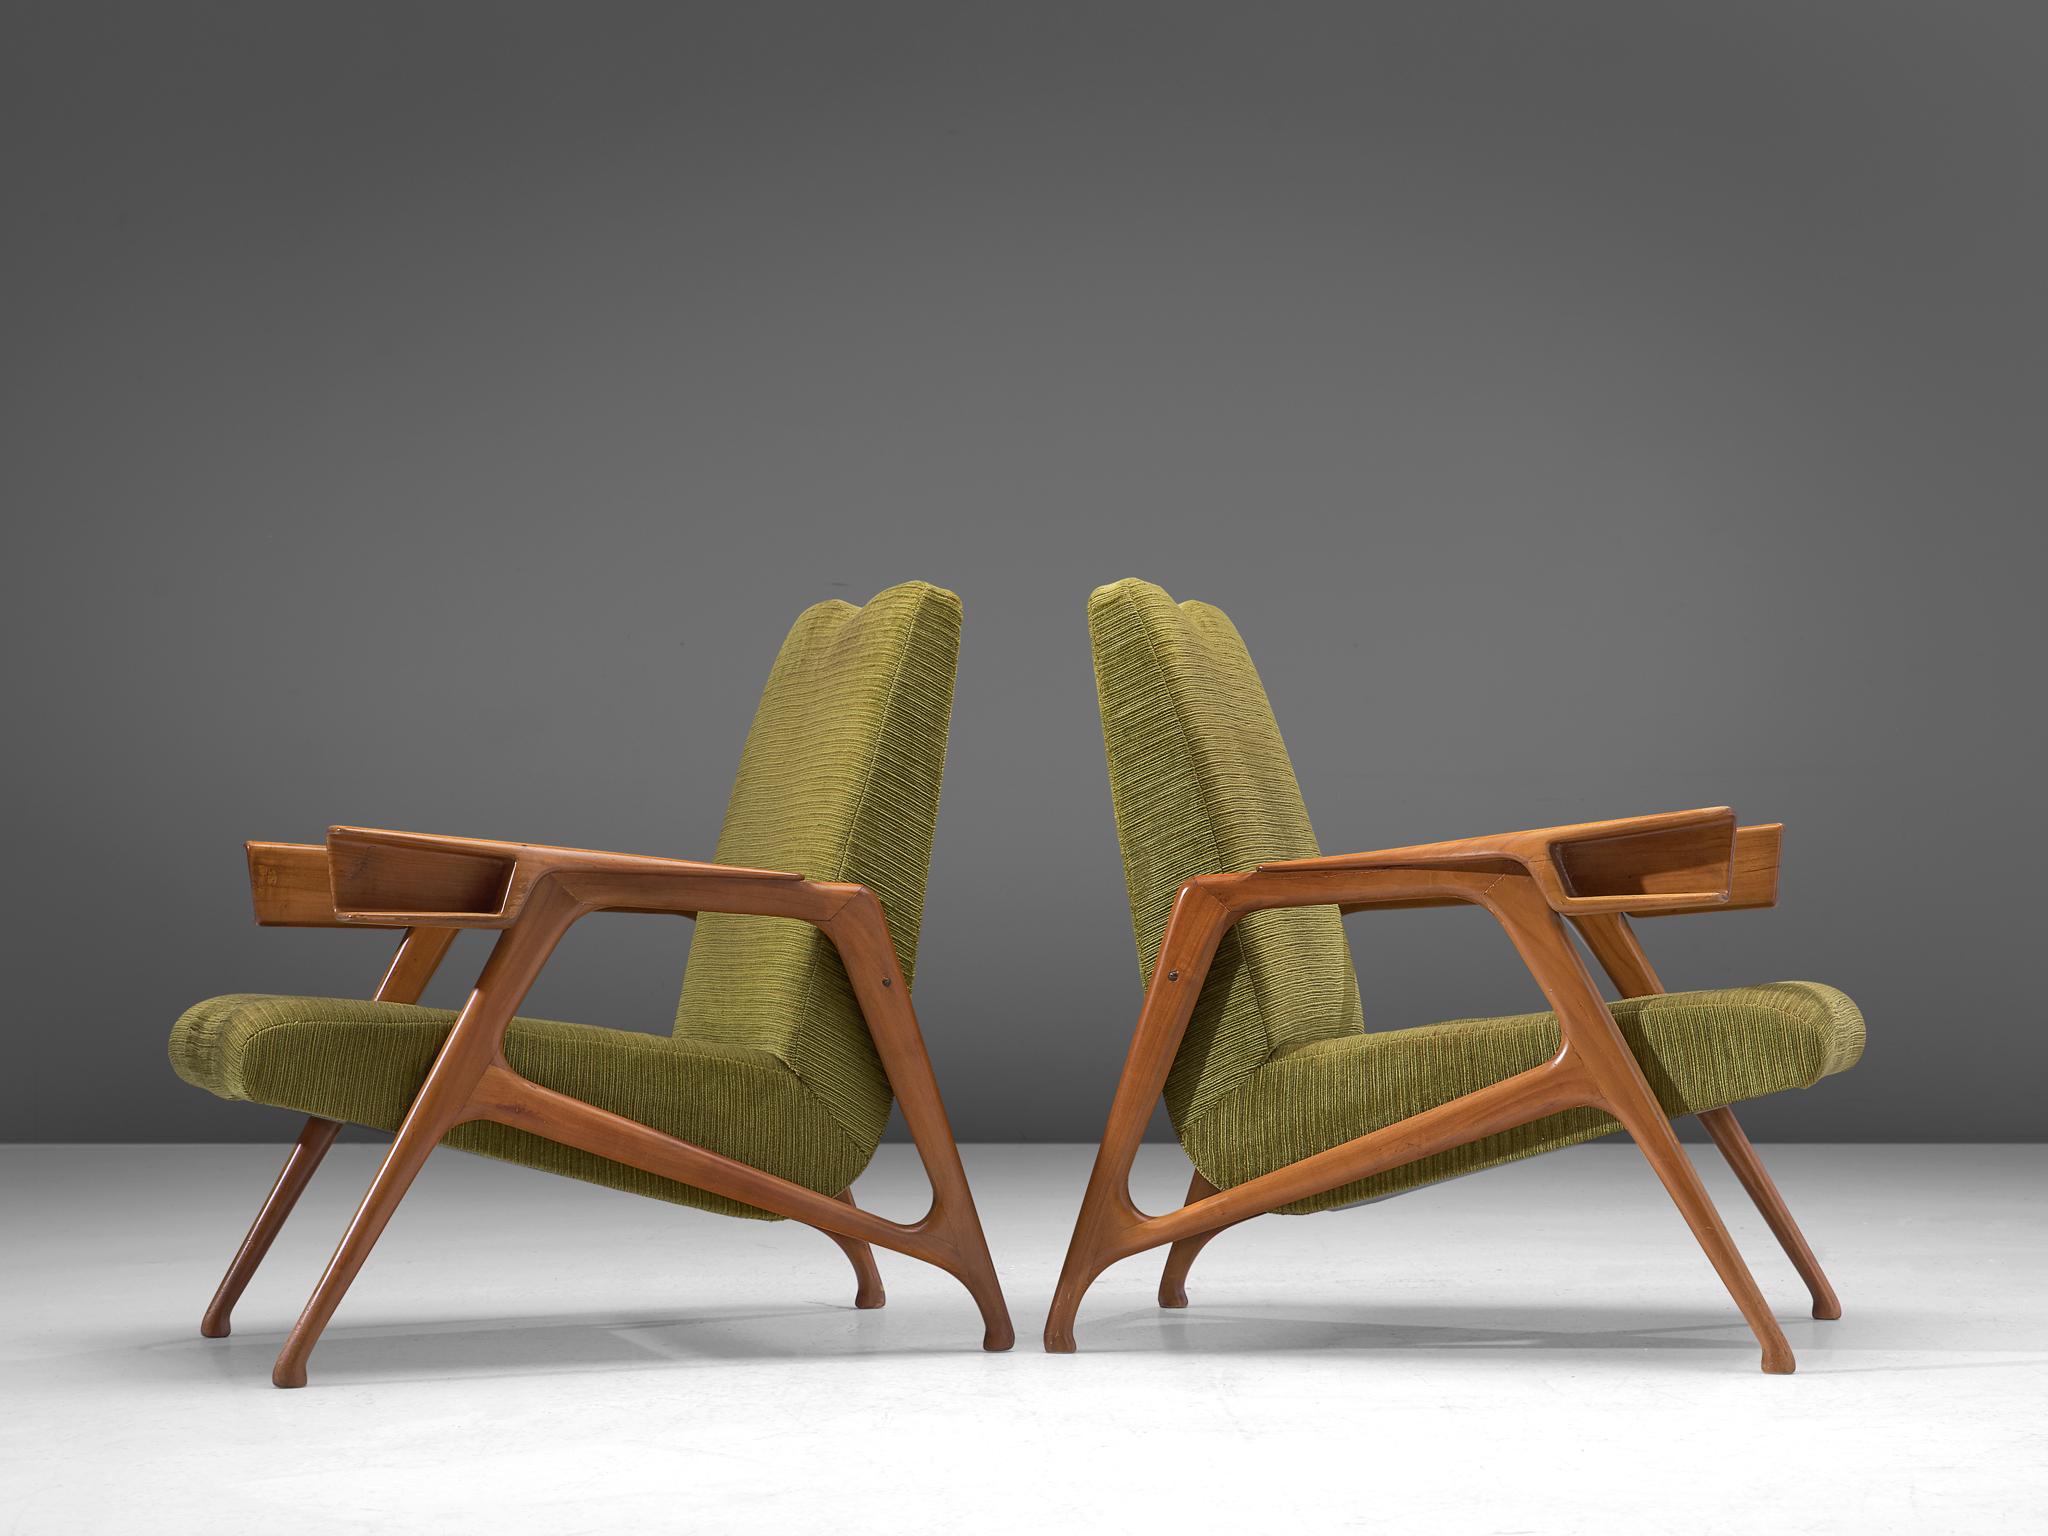 Augusto Romano, pair of lounge chairs, ash and fabric, Italy, 1947.

Architectural armchairs in wood and moss green fabric upholstery, designed by the architect Augusto Romano. High tapered wooden legs provide an open look to the L-shaped seating.